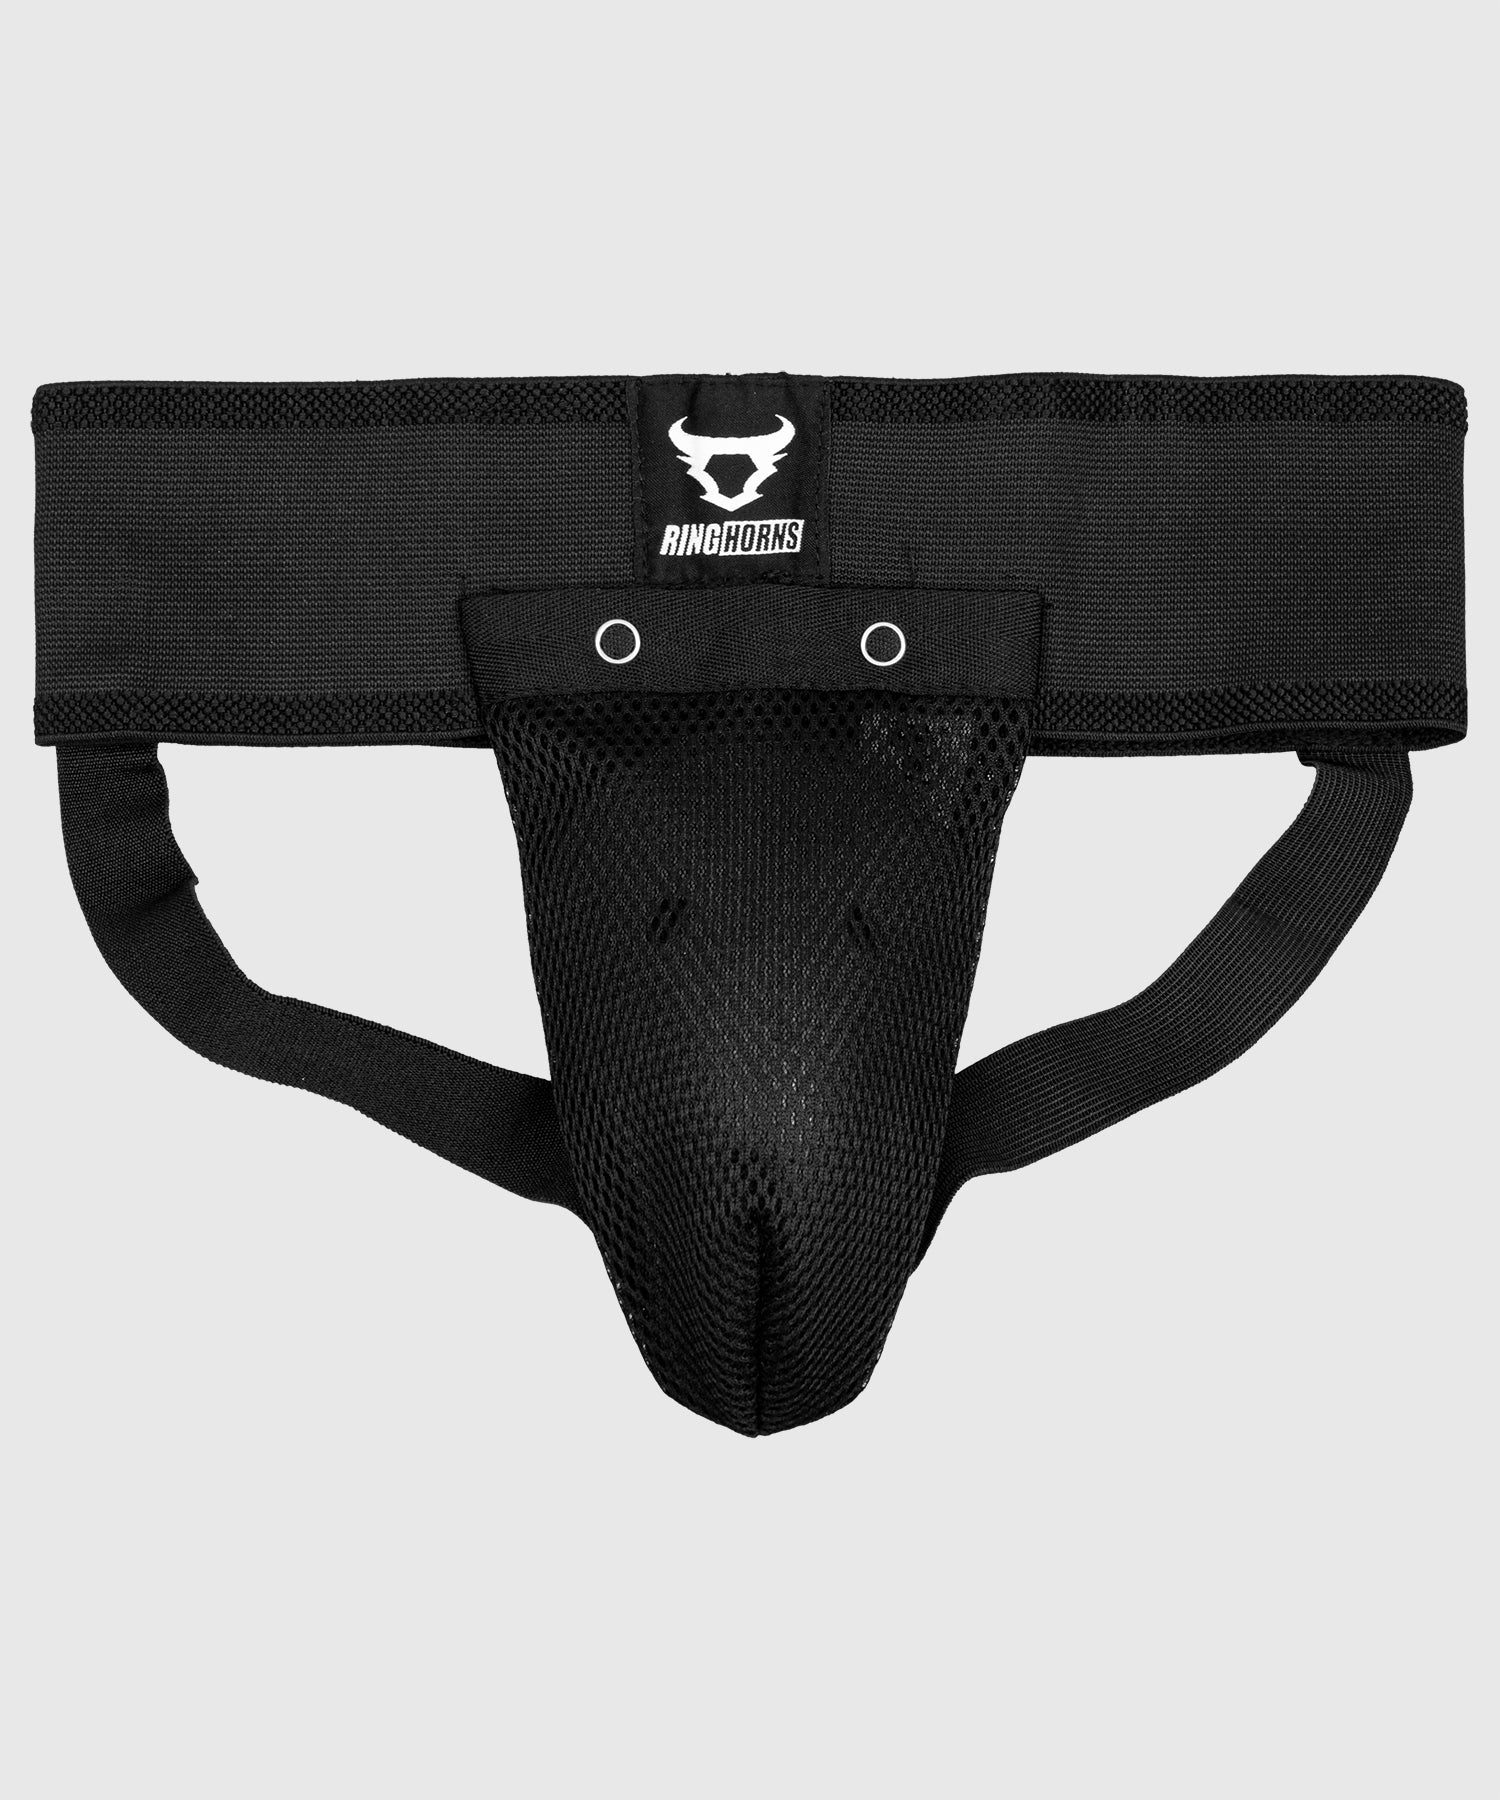 Ringhorns Charger Groin Guard & Support - Black – Venum Europe